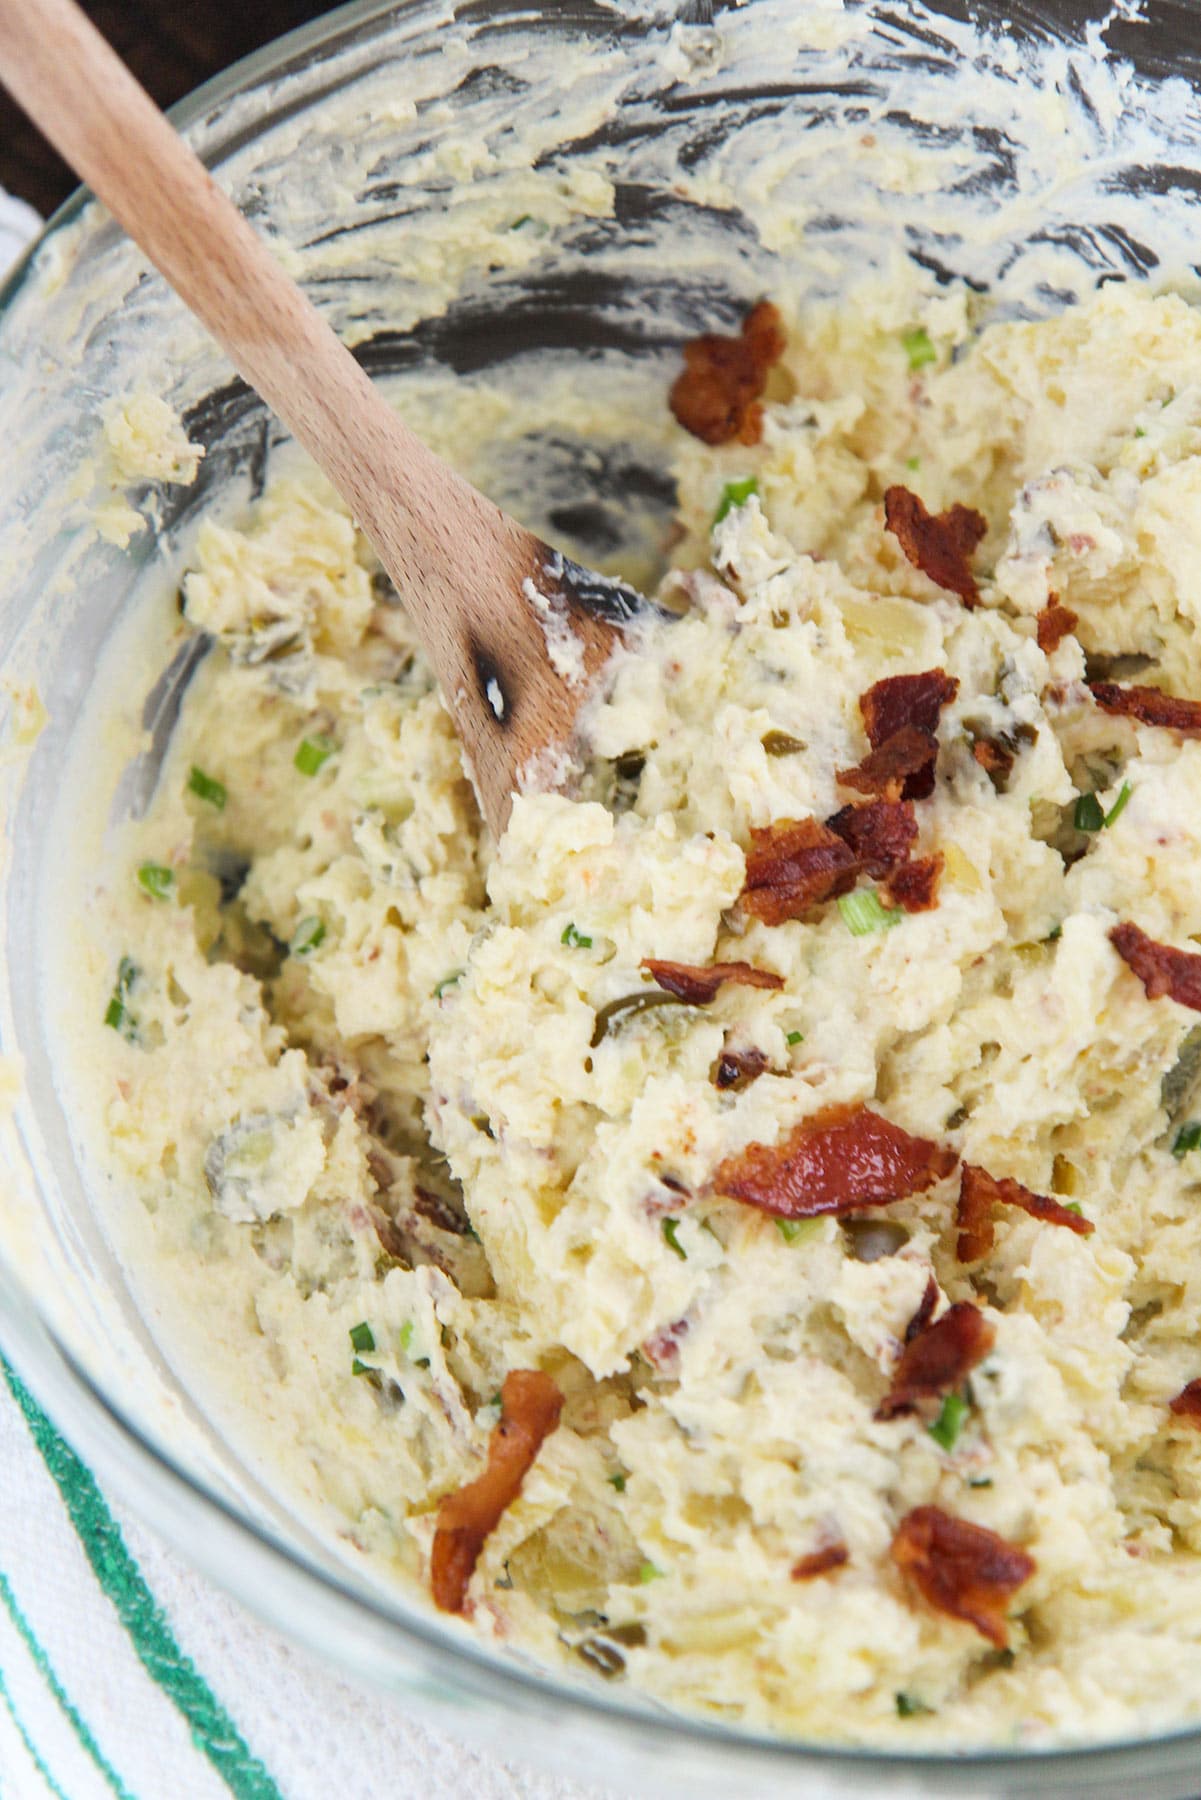 spicy potato salad in a glass bowl with bacon on top, a wooden spoon, and a green and white towel on the side. 